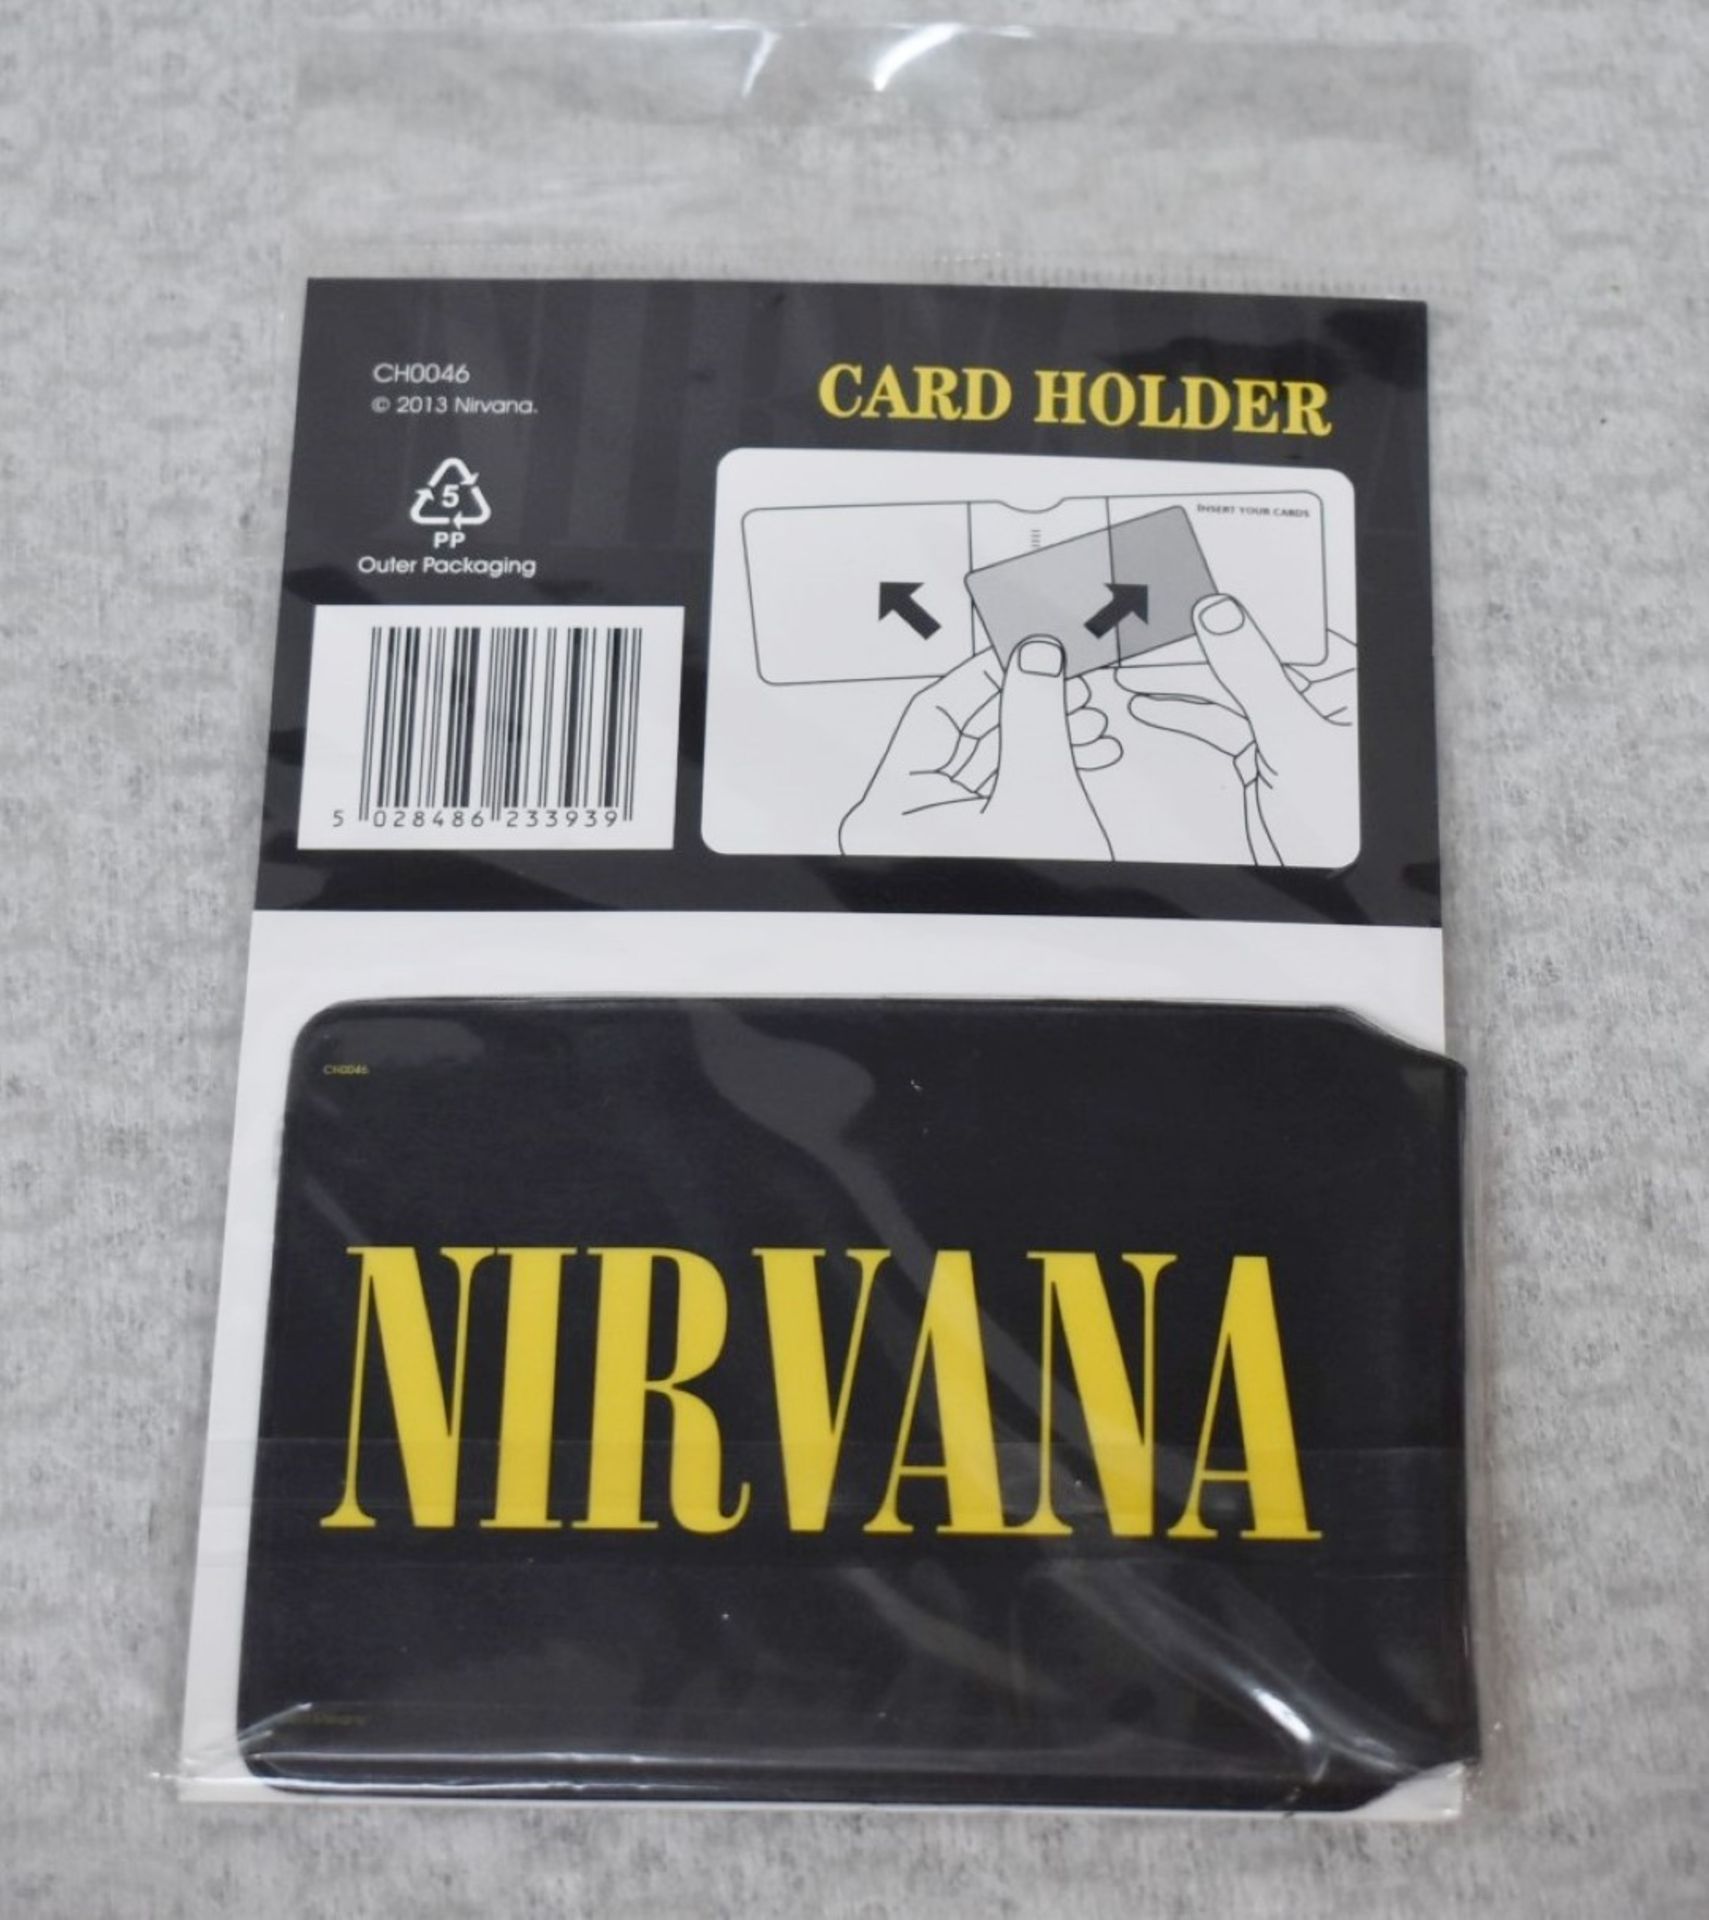 24 x Card Holder Wallets Featuring David Bowie, Nirvana, Rolling Stones, ACDC, Bob Marley, Pink - Image 15 of 15